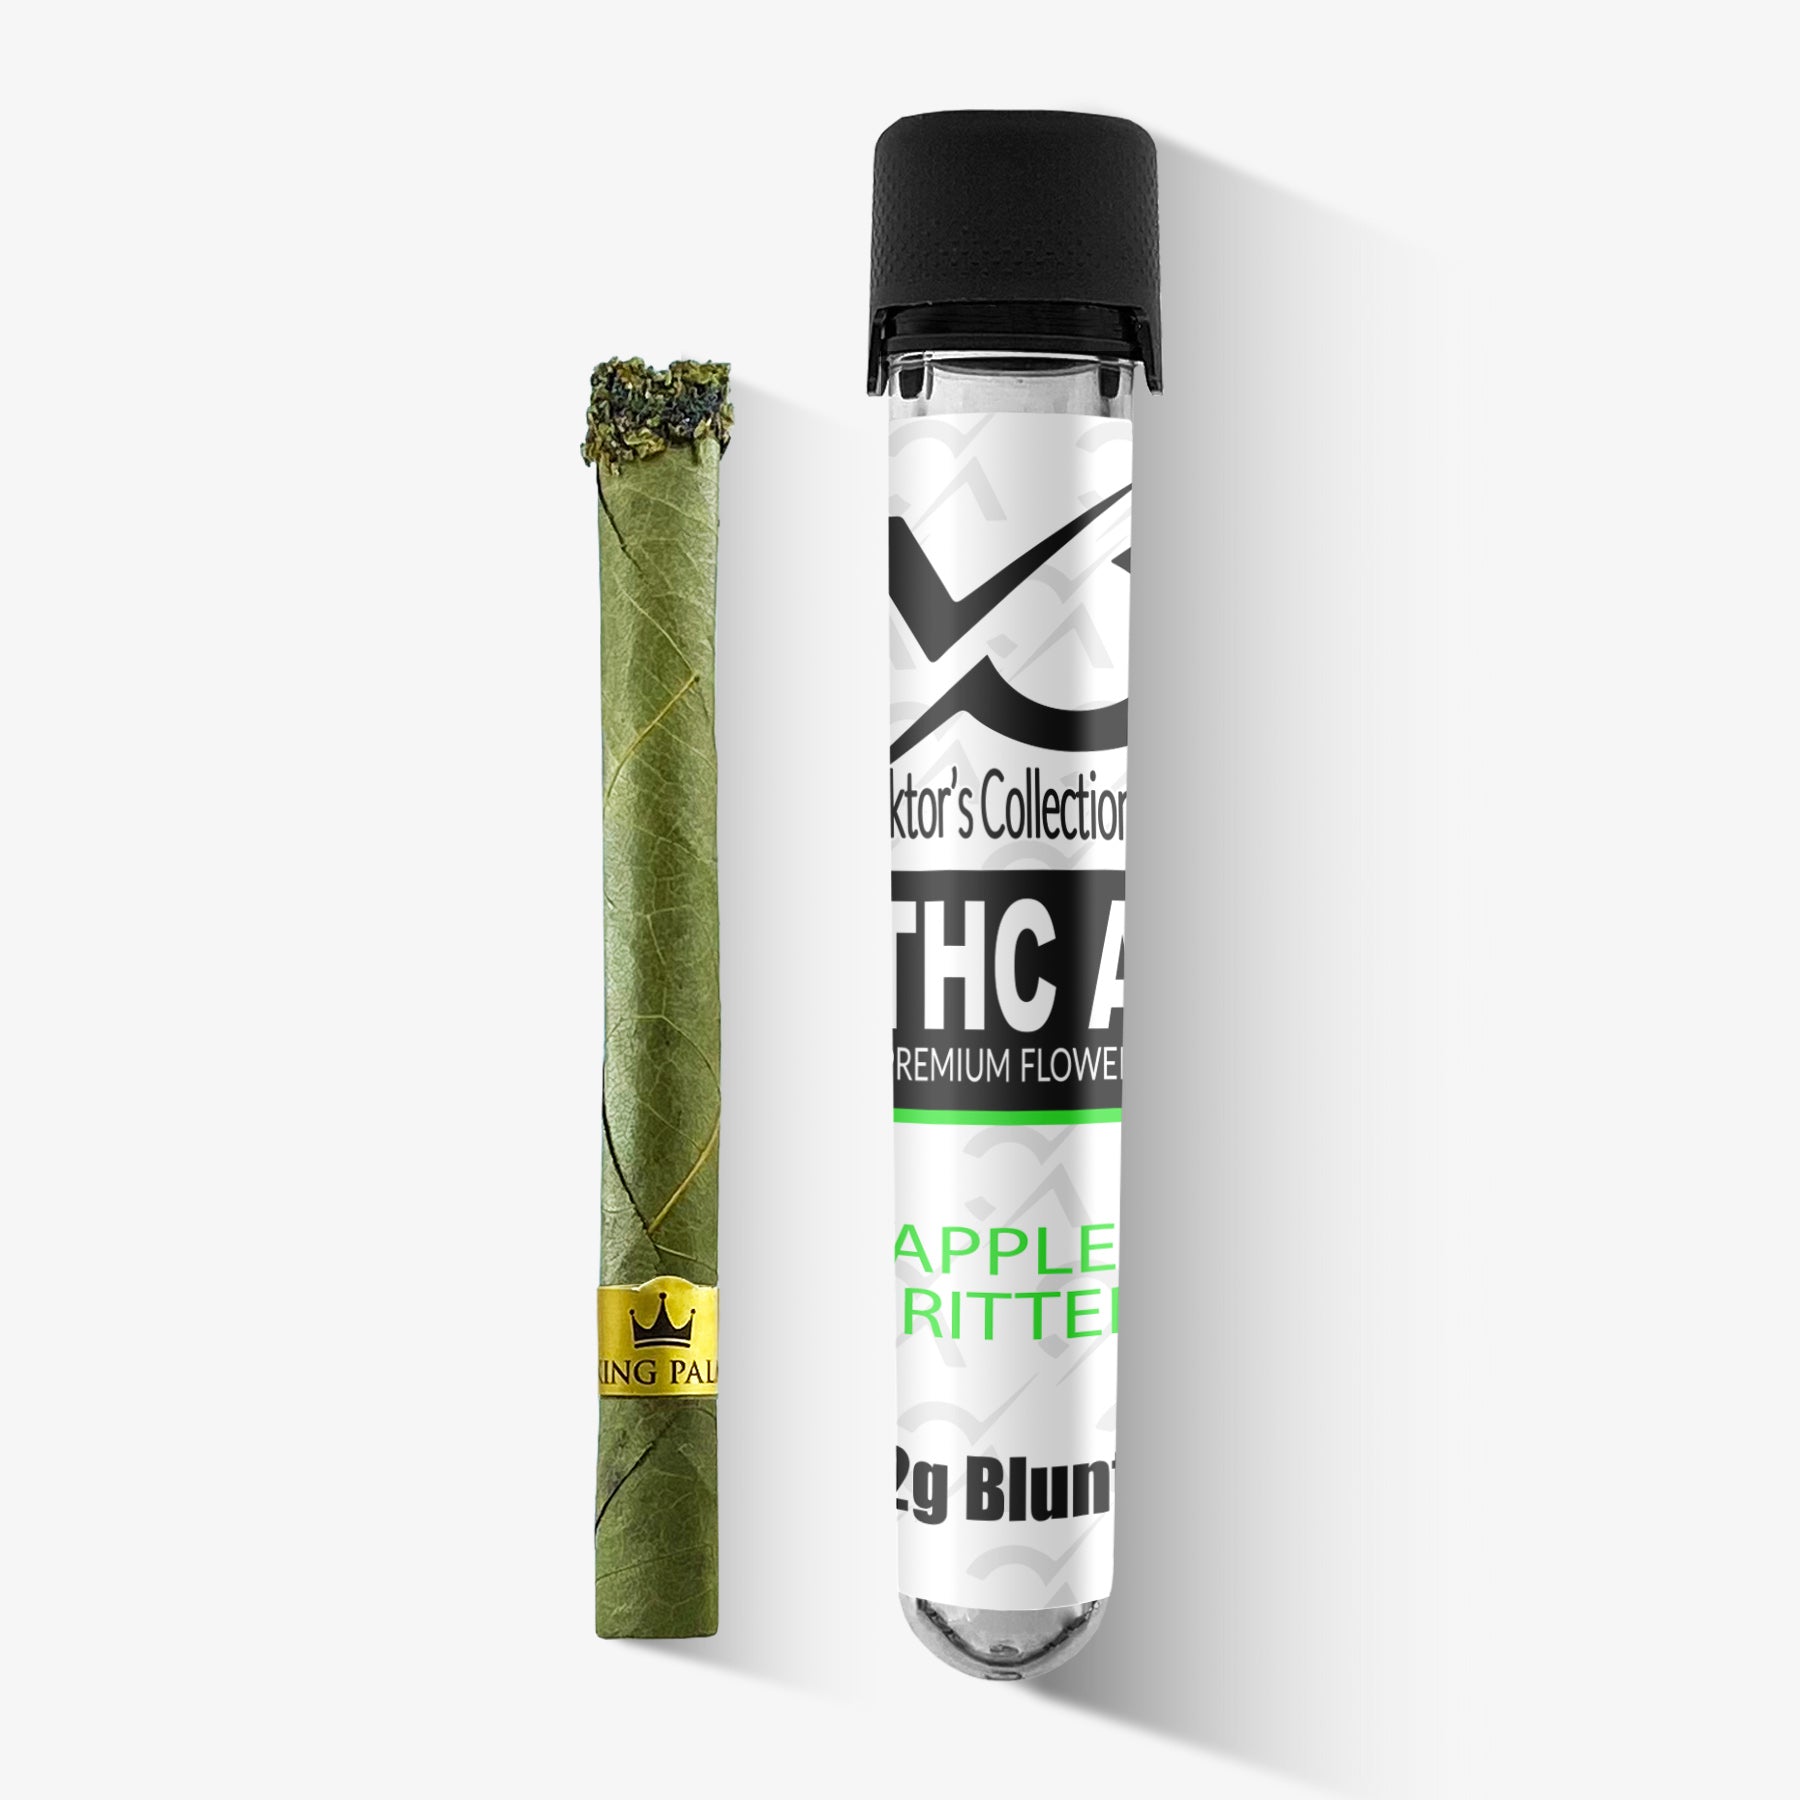 victor's collection thc-a flower apple fritter 2g blunt